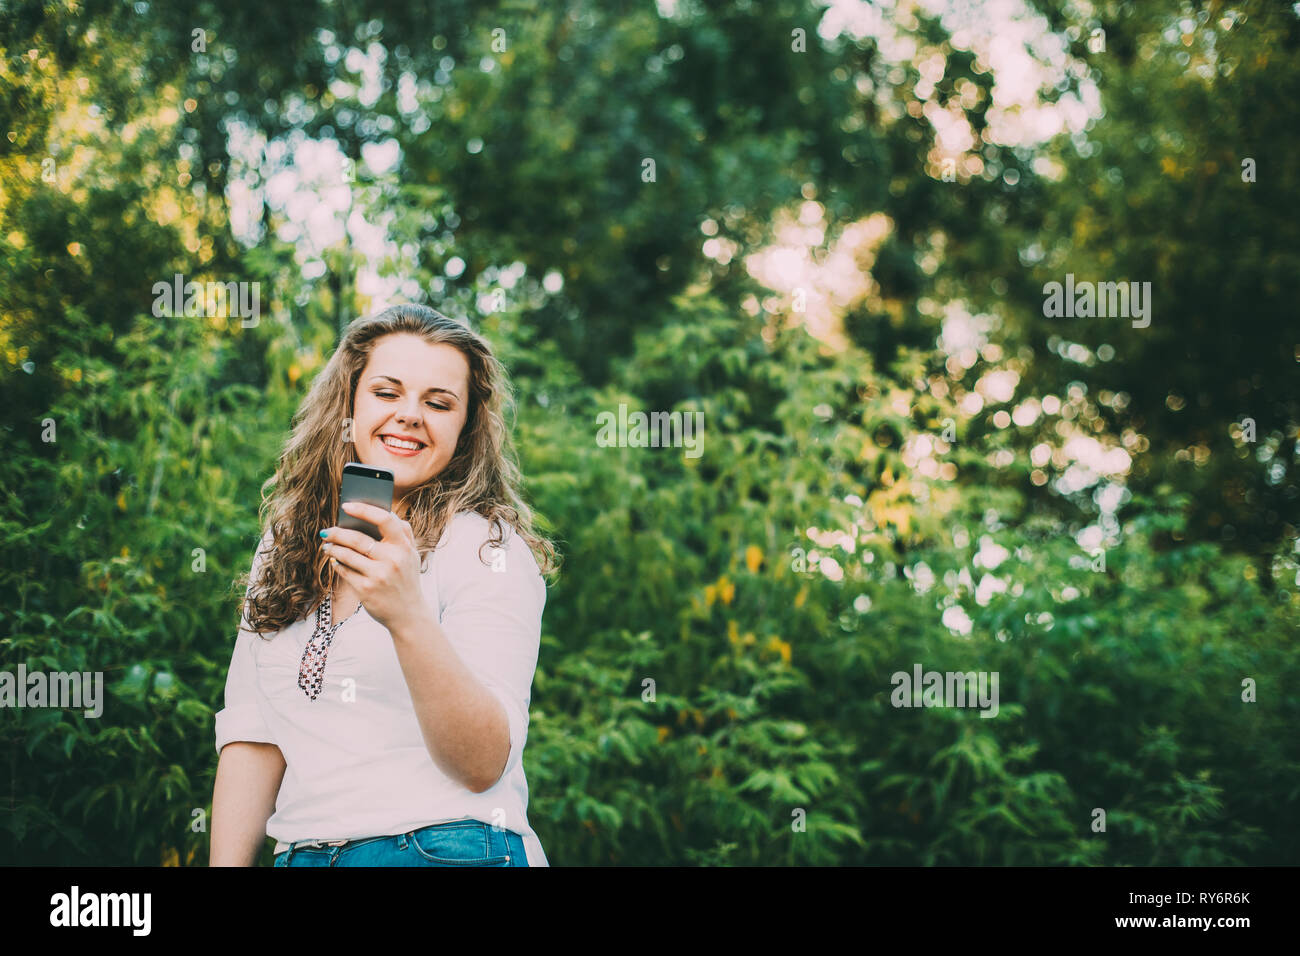 Young Beautiful Pretty Plus Size Caucasian Girl Woman Dressed In White Blouse And Blue Jeans Enjoying Life, Smiling And Using Smartphone Standing On S Stock Photo